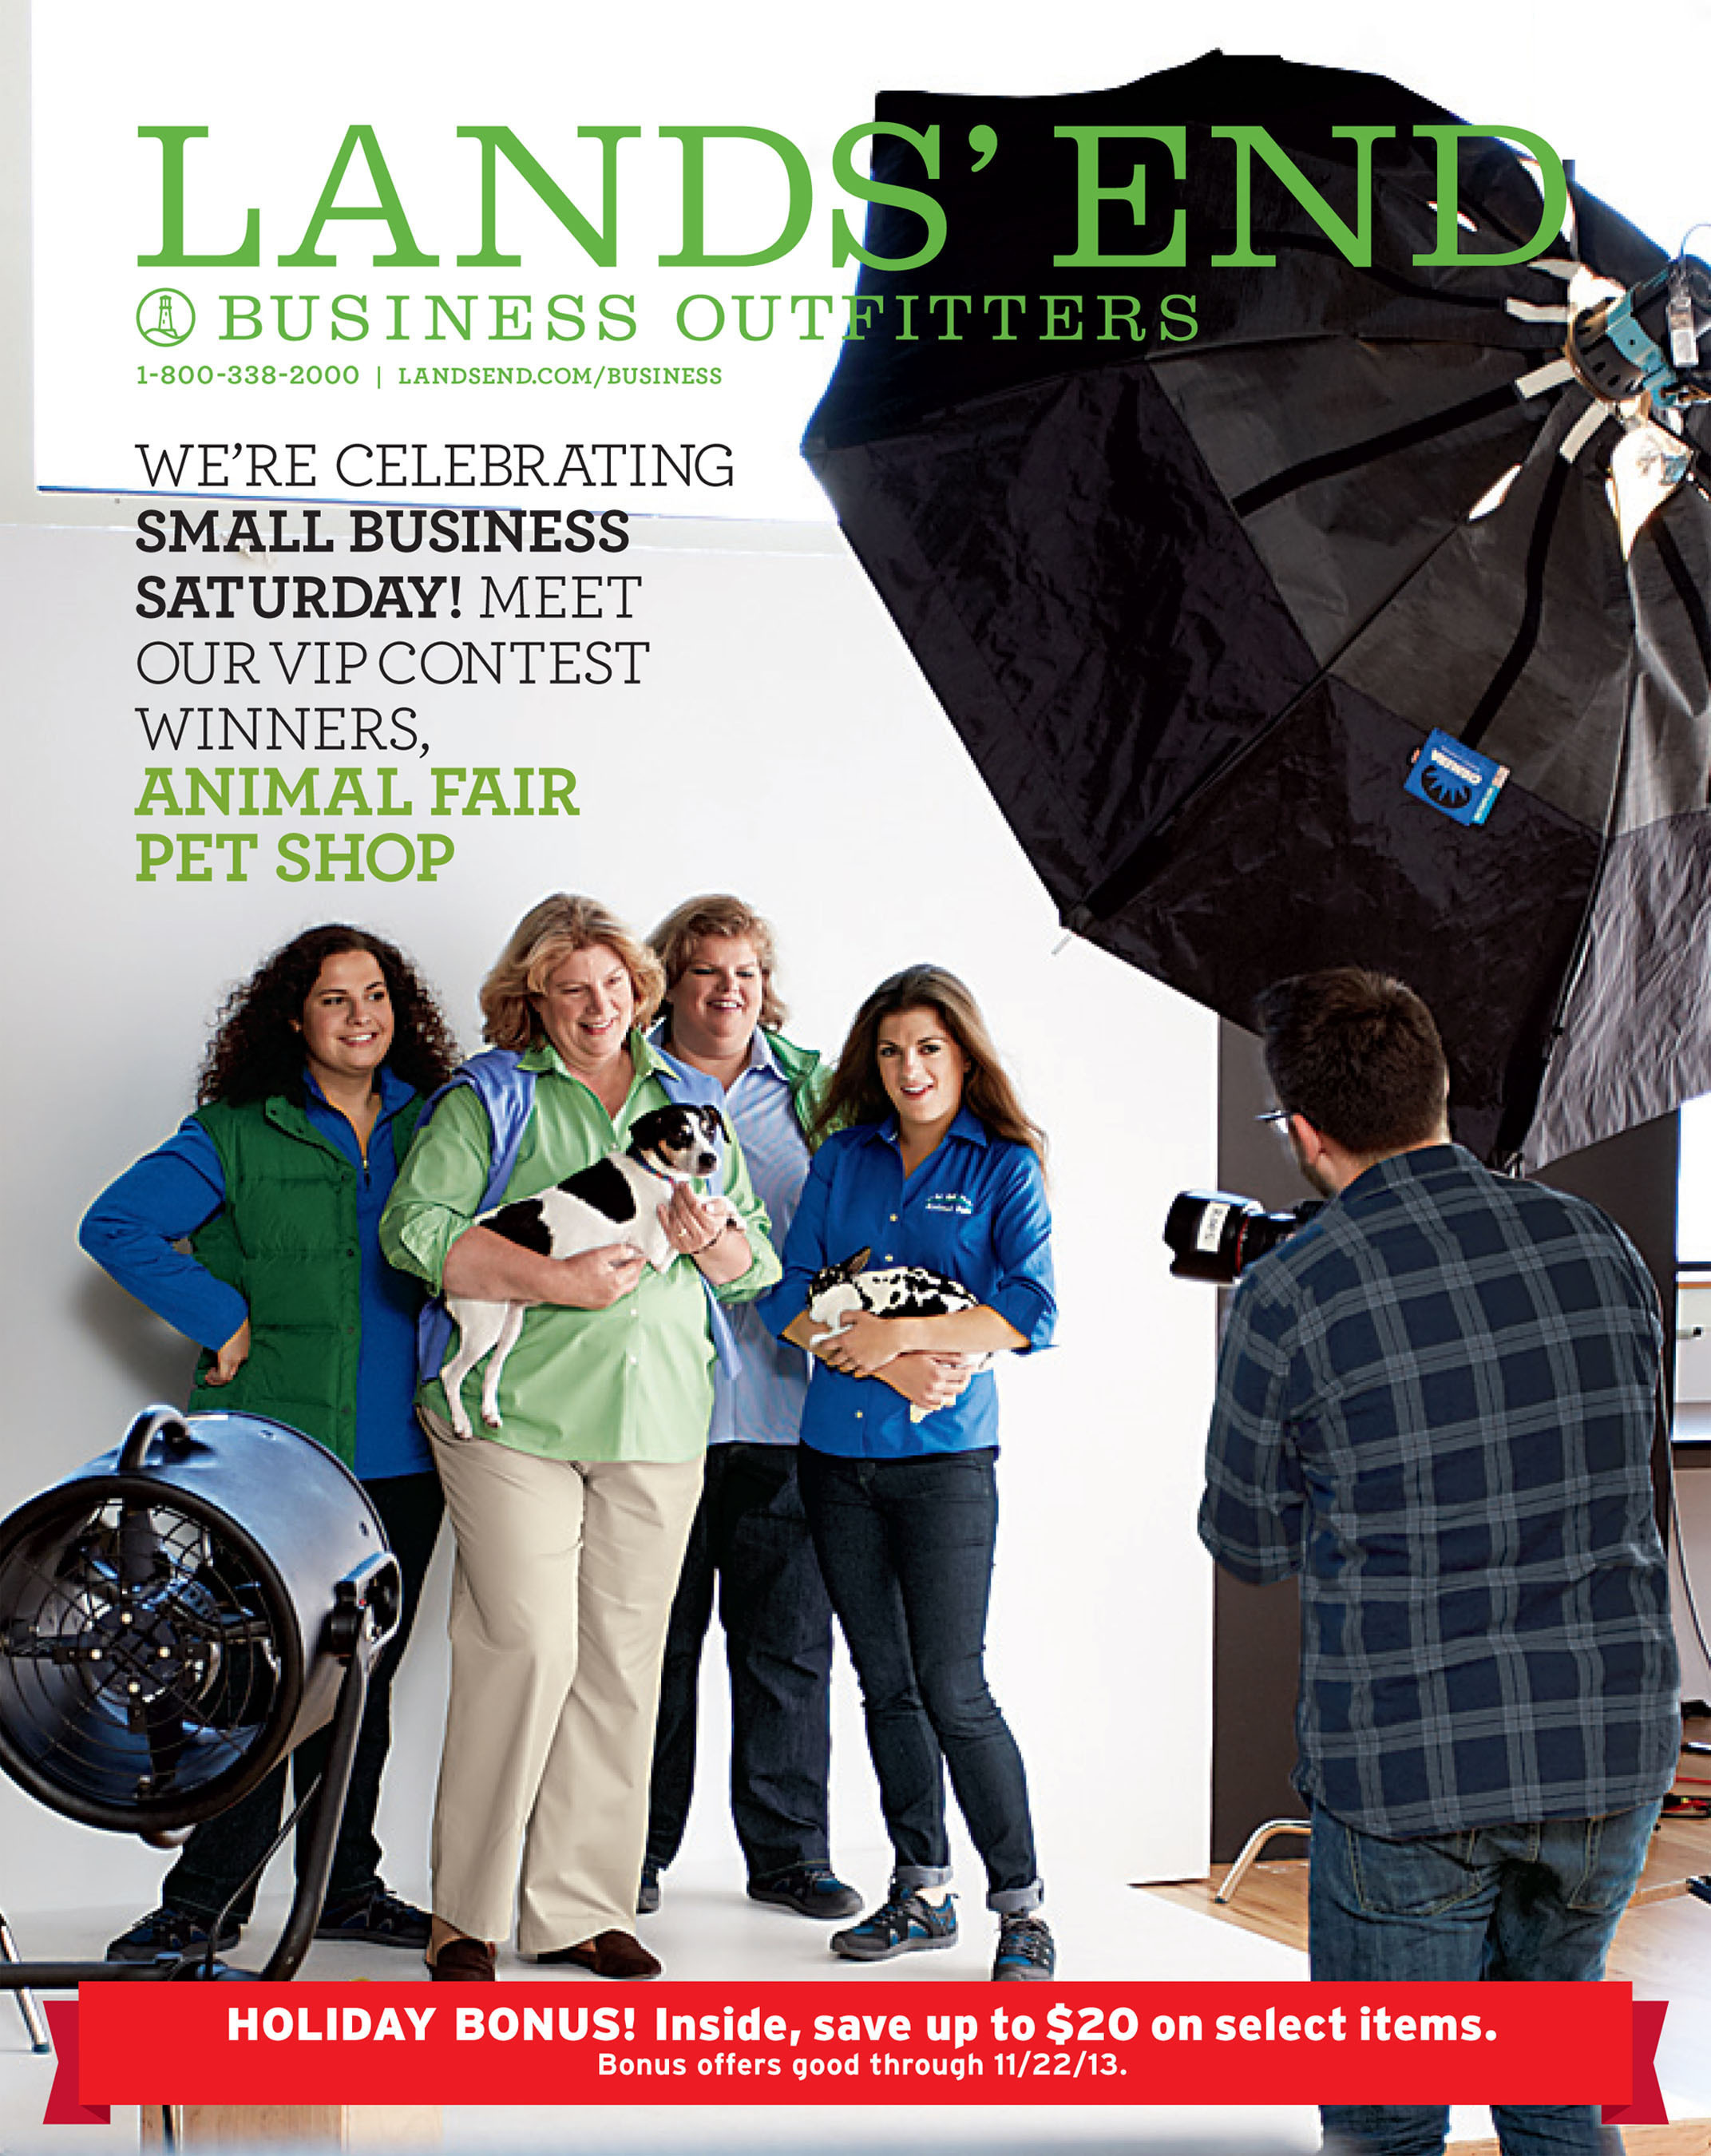 Lands' End Business Outfitters and Inc. Magazine Celebrate Small Business  Saturday; Announce Grand Prize Winner of Their Small Business VIP Contest